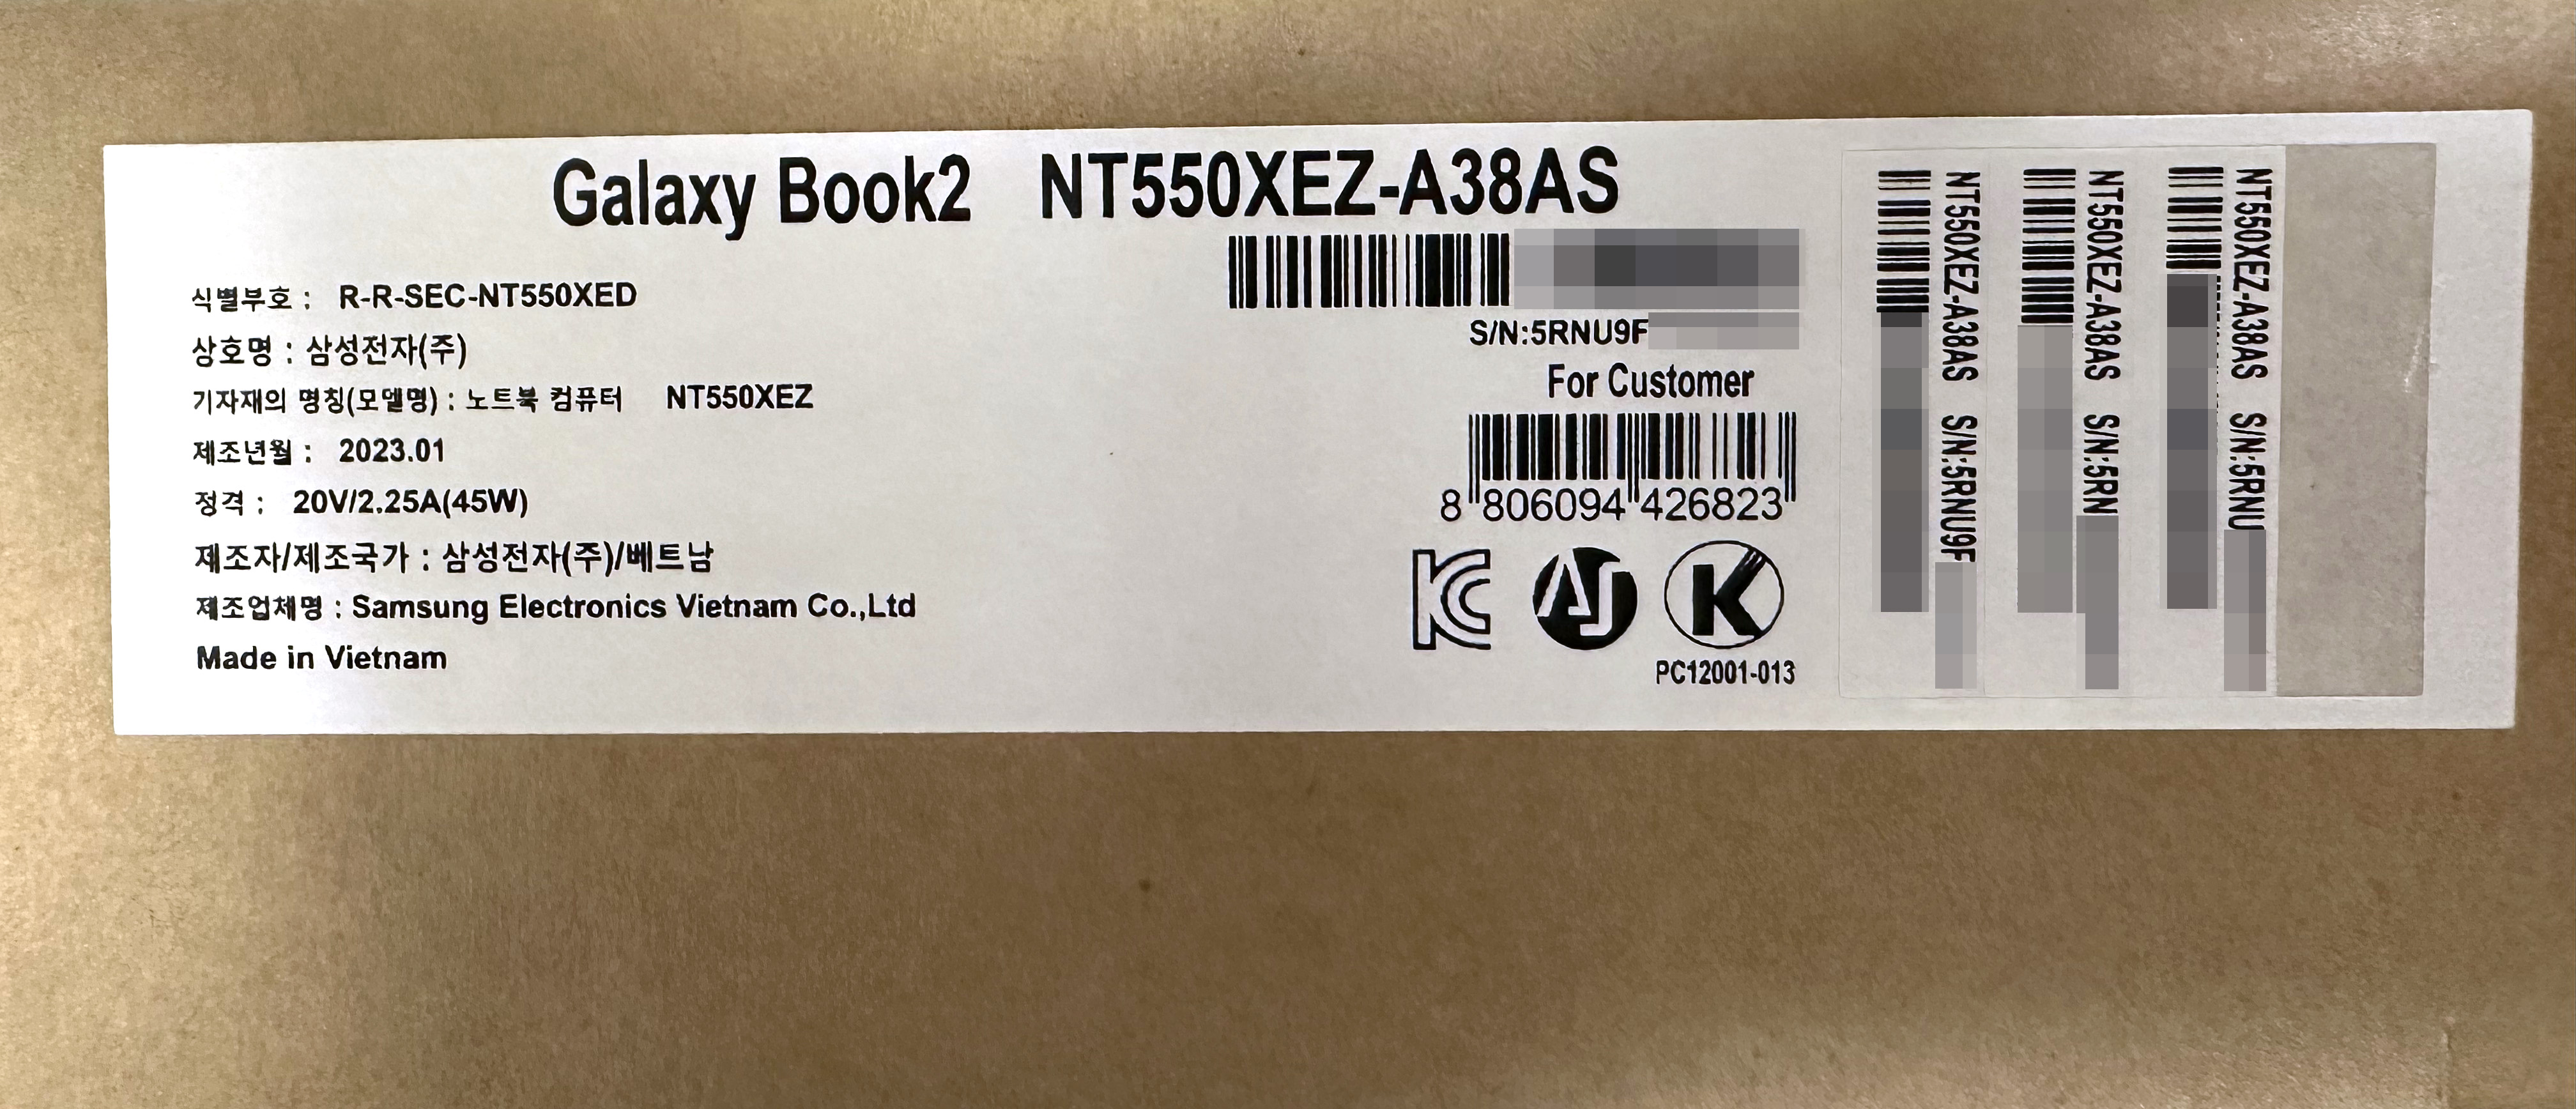 Samsung Galaxy Book2 (NT550XEZ-A38AS) Box Package Side